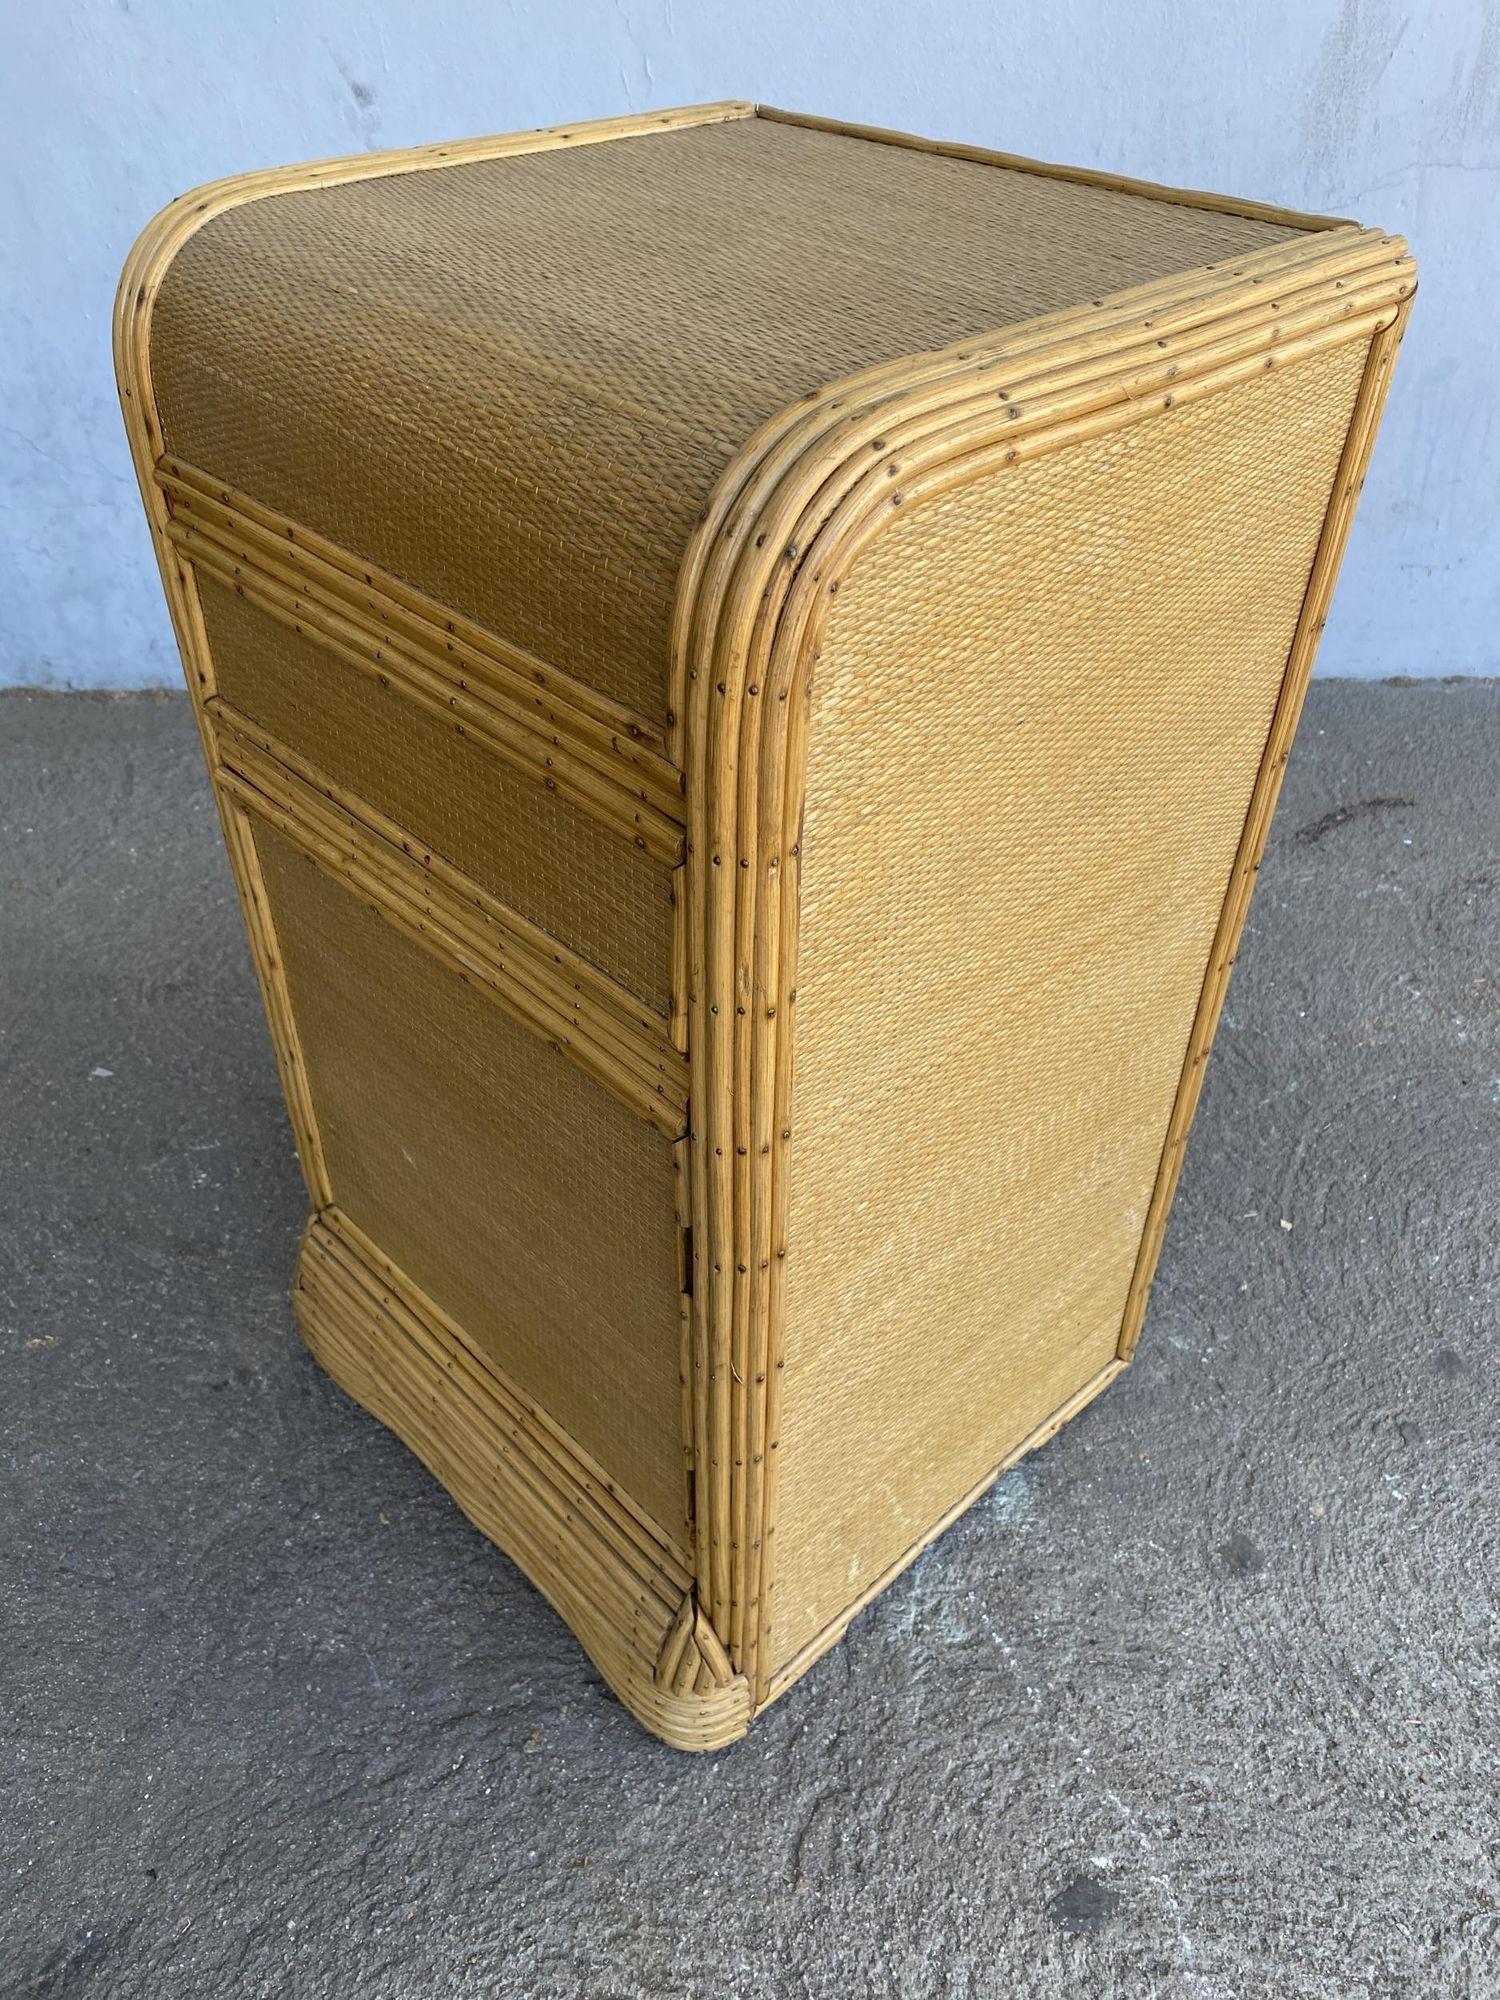 Streamline Art Deco era stick rattan side table with Grass-mat coverings and edges are finished with brass nails. The side table features a single door that opens from the front and a center drawer.

Designed in the manner of Paul Frankl.

1930,